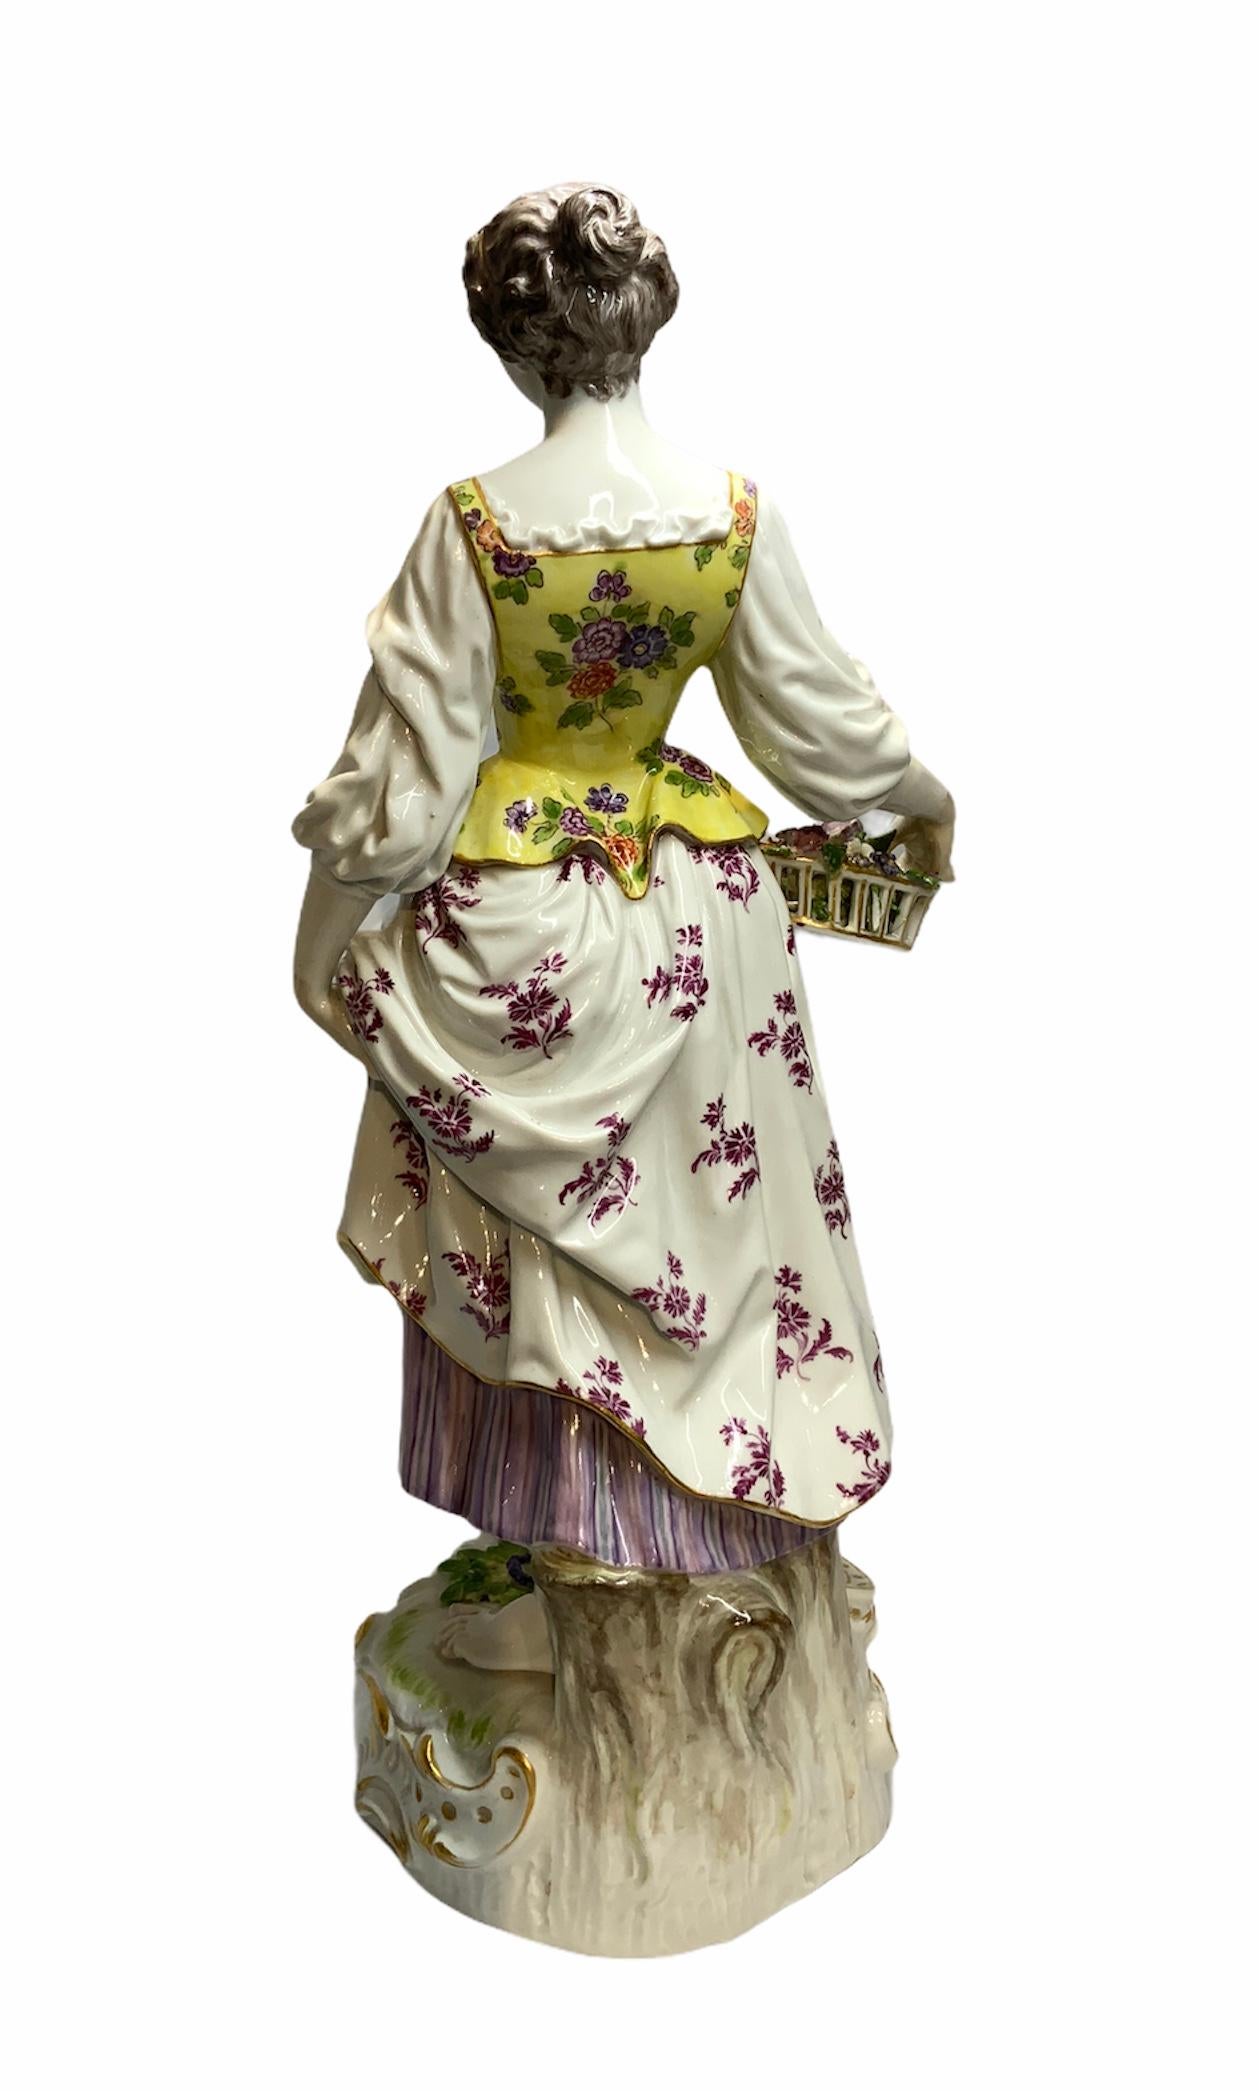 This is a Meissen porcelain depicting a young shepherdess dressed with a colorful flower’s fabric. She is barefooted over a gilt rocaille white base and standing in front of a tree trunk. She is also holding a basket of flowers in her right hand.